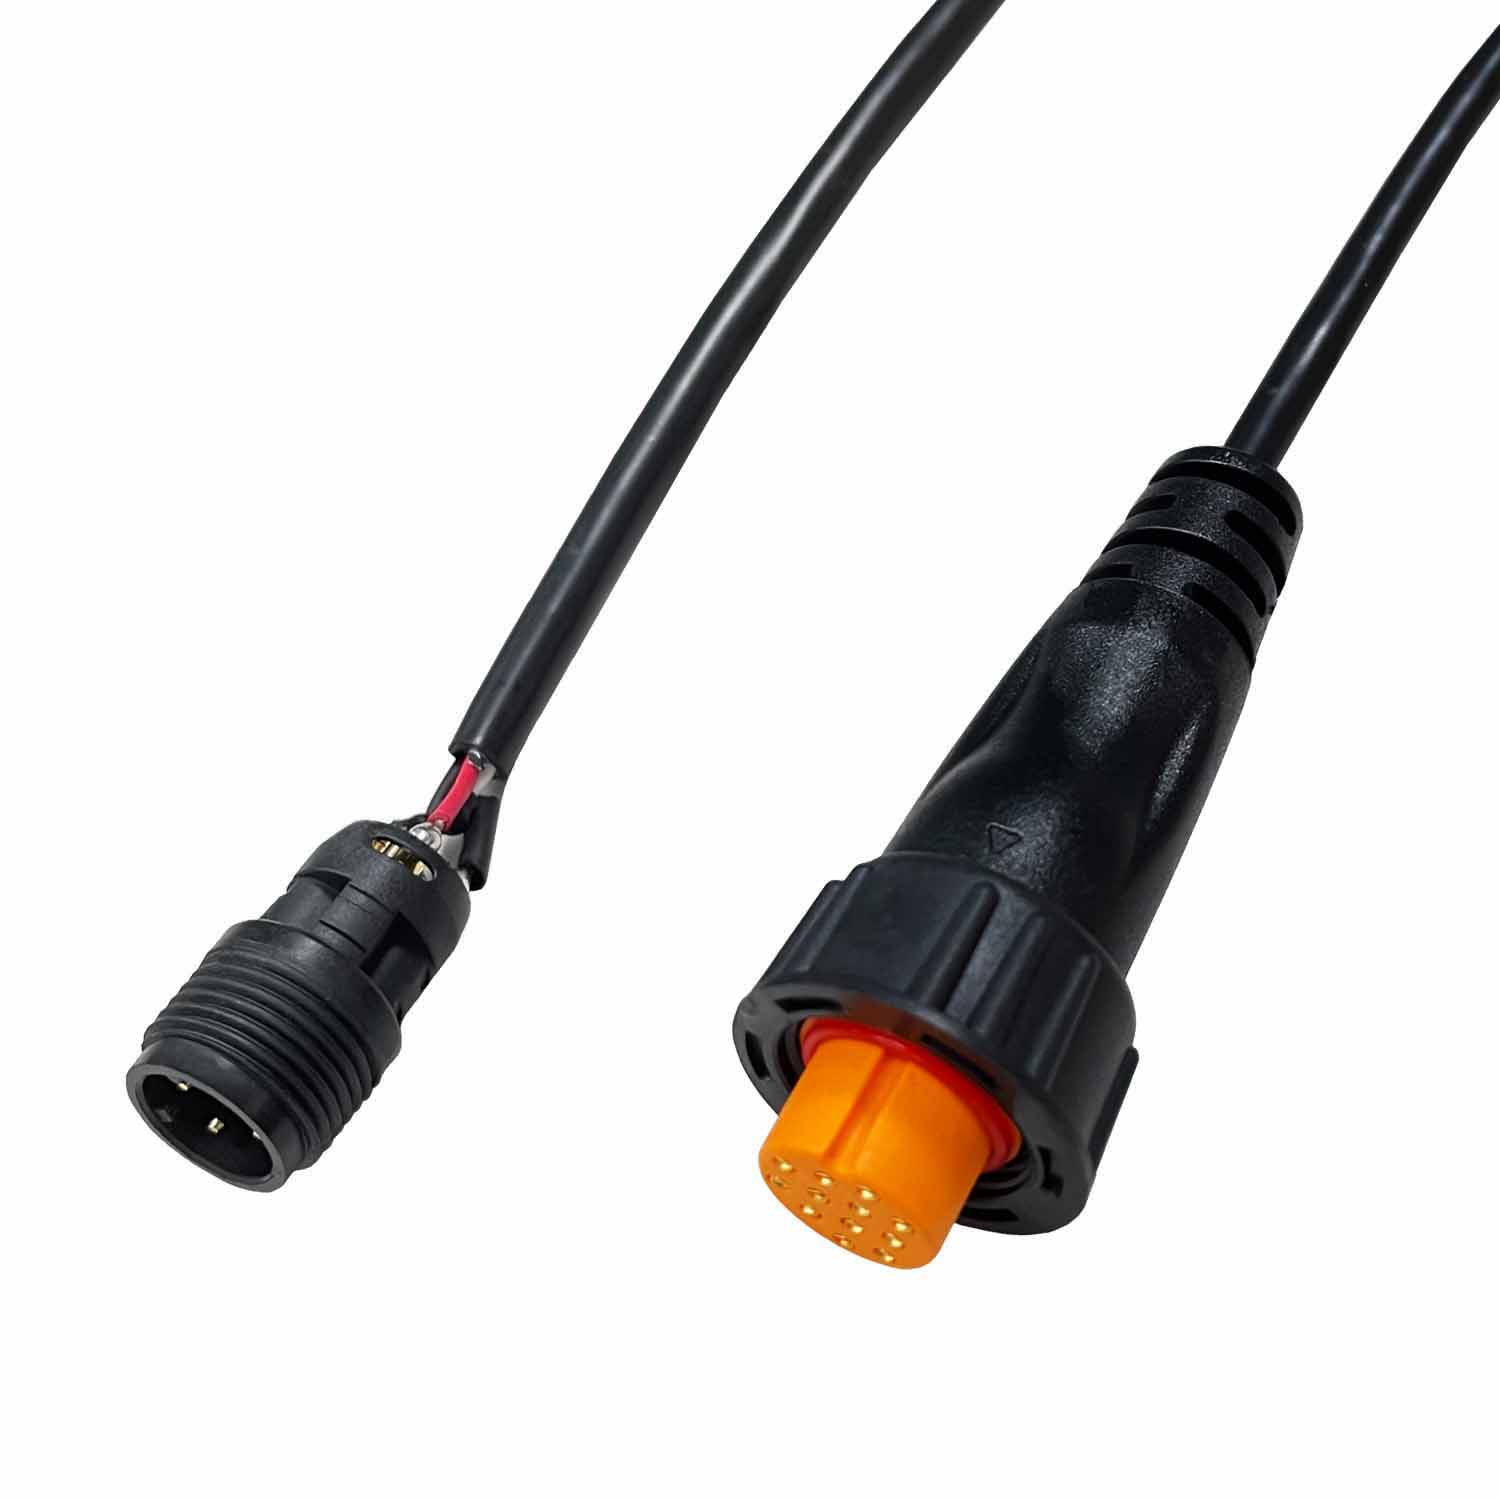 Water-PROOF DC CABLE